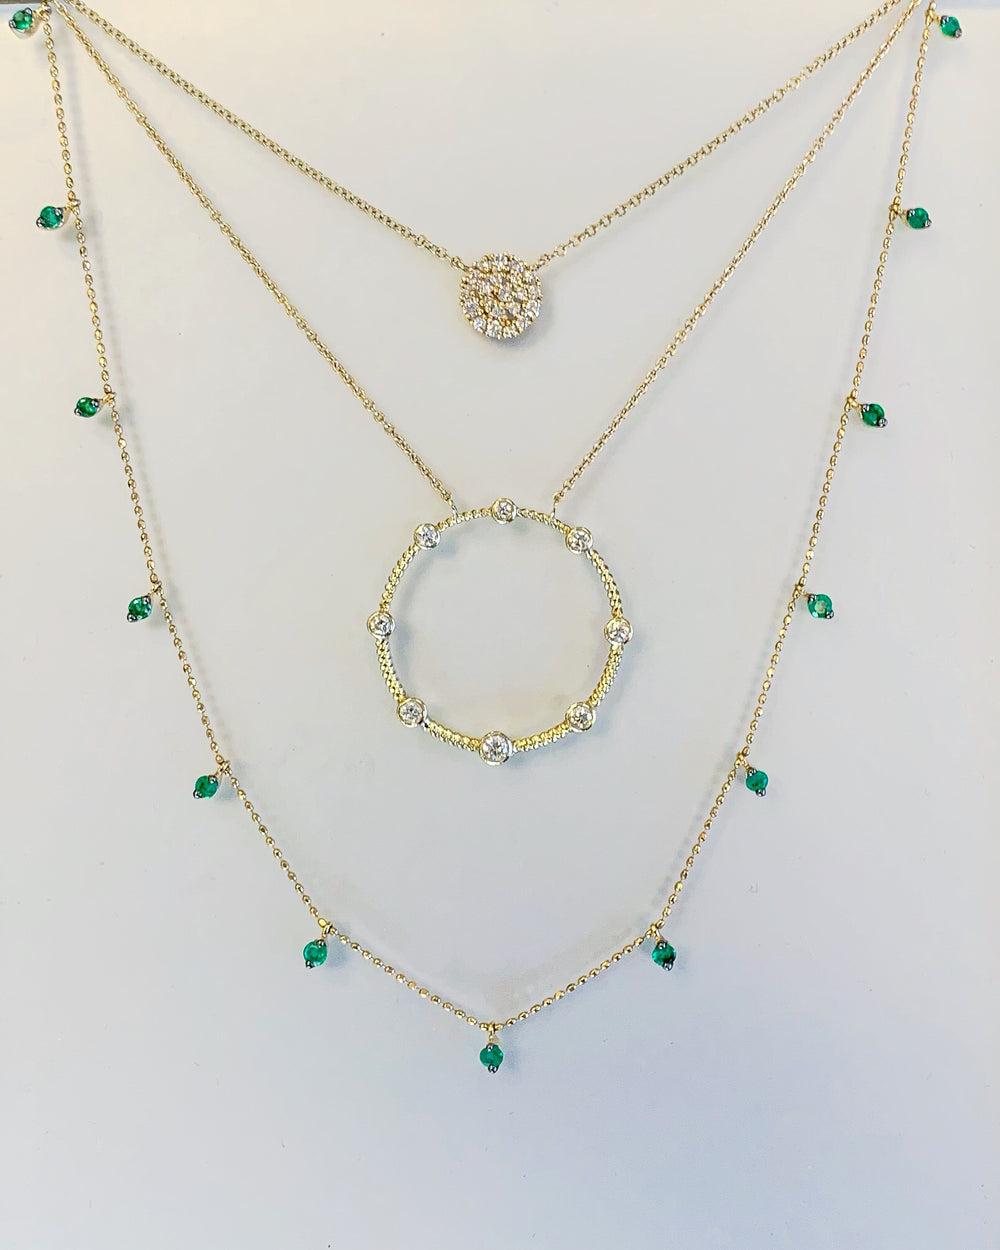 3 necklaces layered. yellow gold diamond pavé disk, 14k yellow gold diamond open negative space circle pendant, and 14k yellow gold emerald dangle drop necklace 